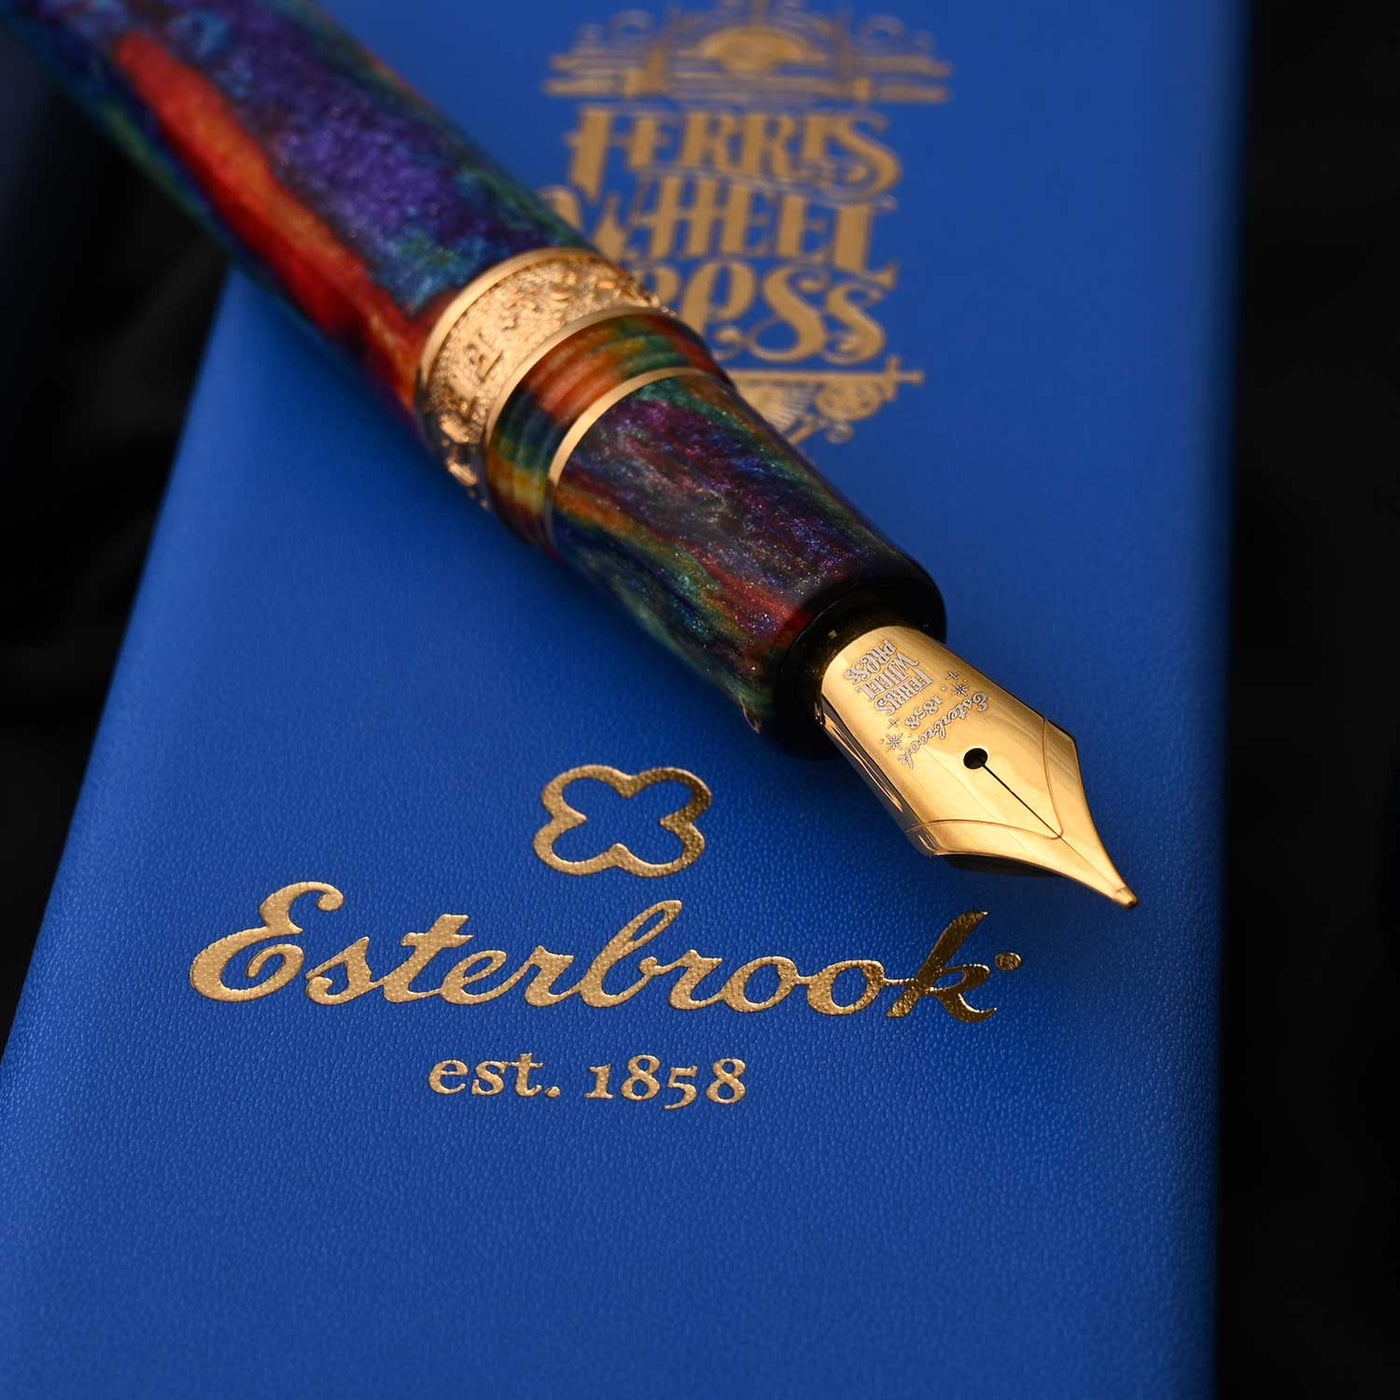 Esterbrook x Ferris Wheel Press Nebulous Plume Collaboration Limited Edition Fountain Pen with Ink 11